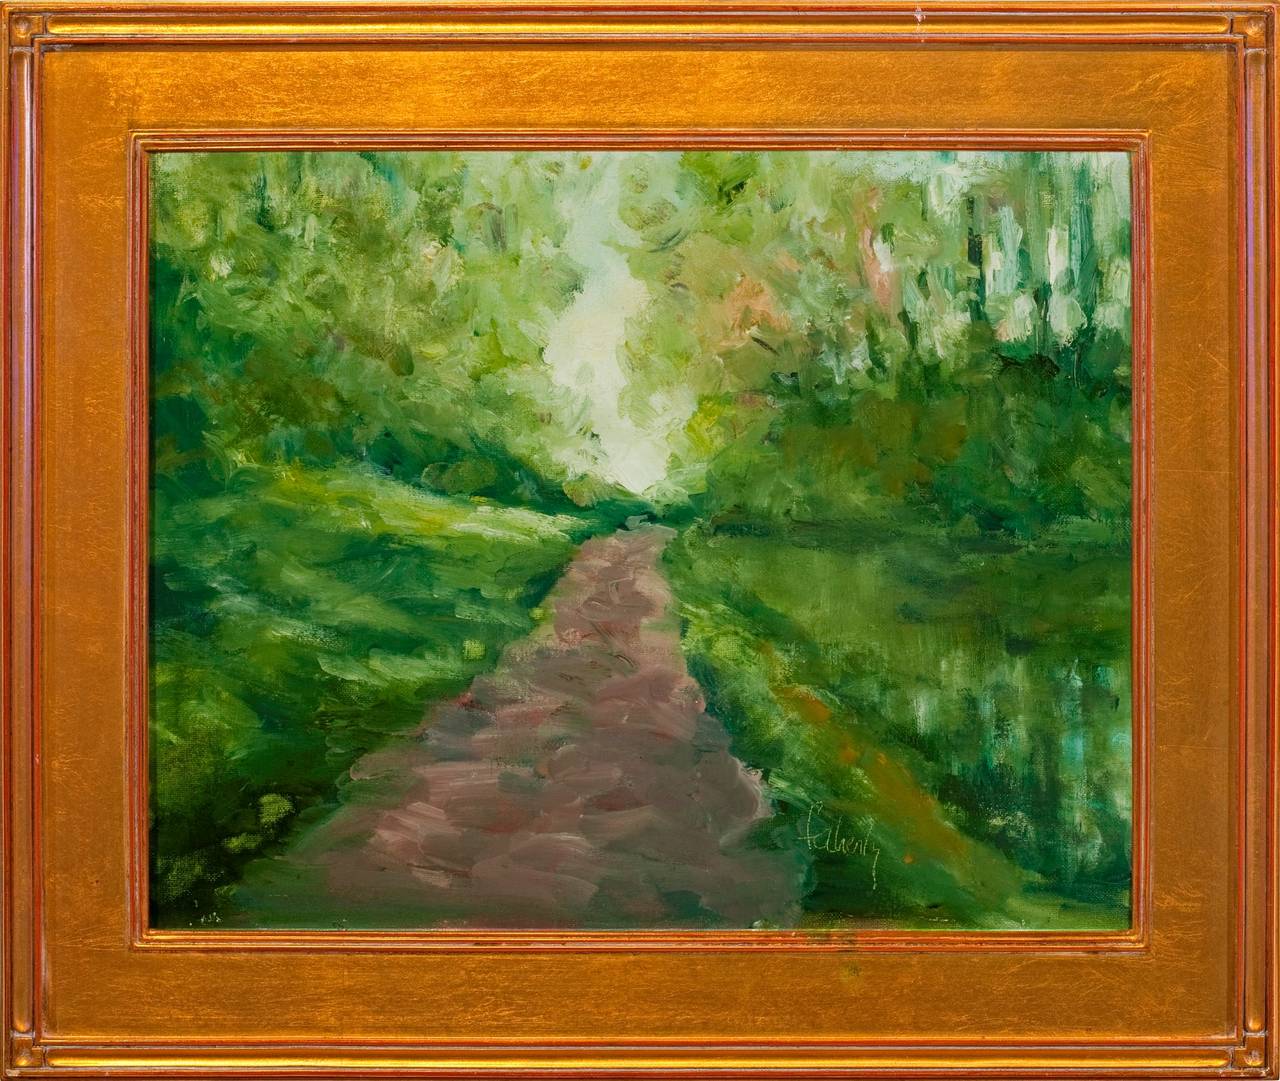 Evelyn Faherty Landscape Painting - "Along the Towpath"